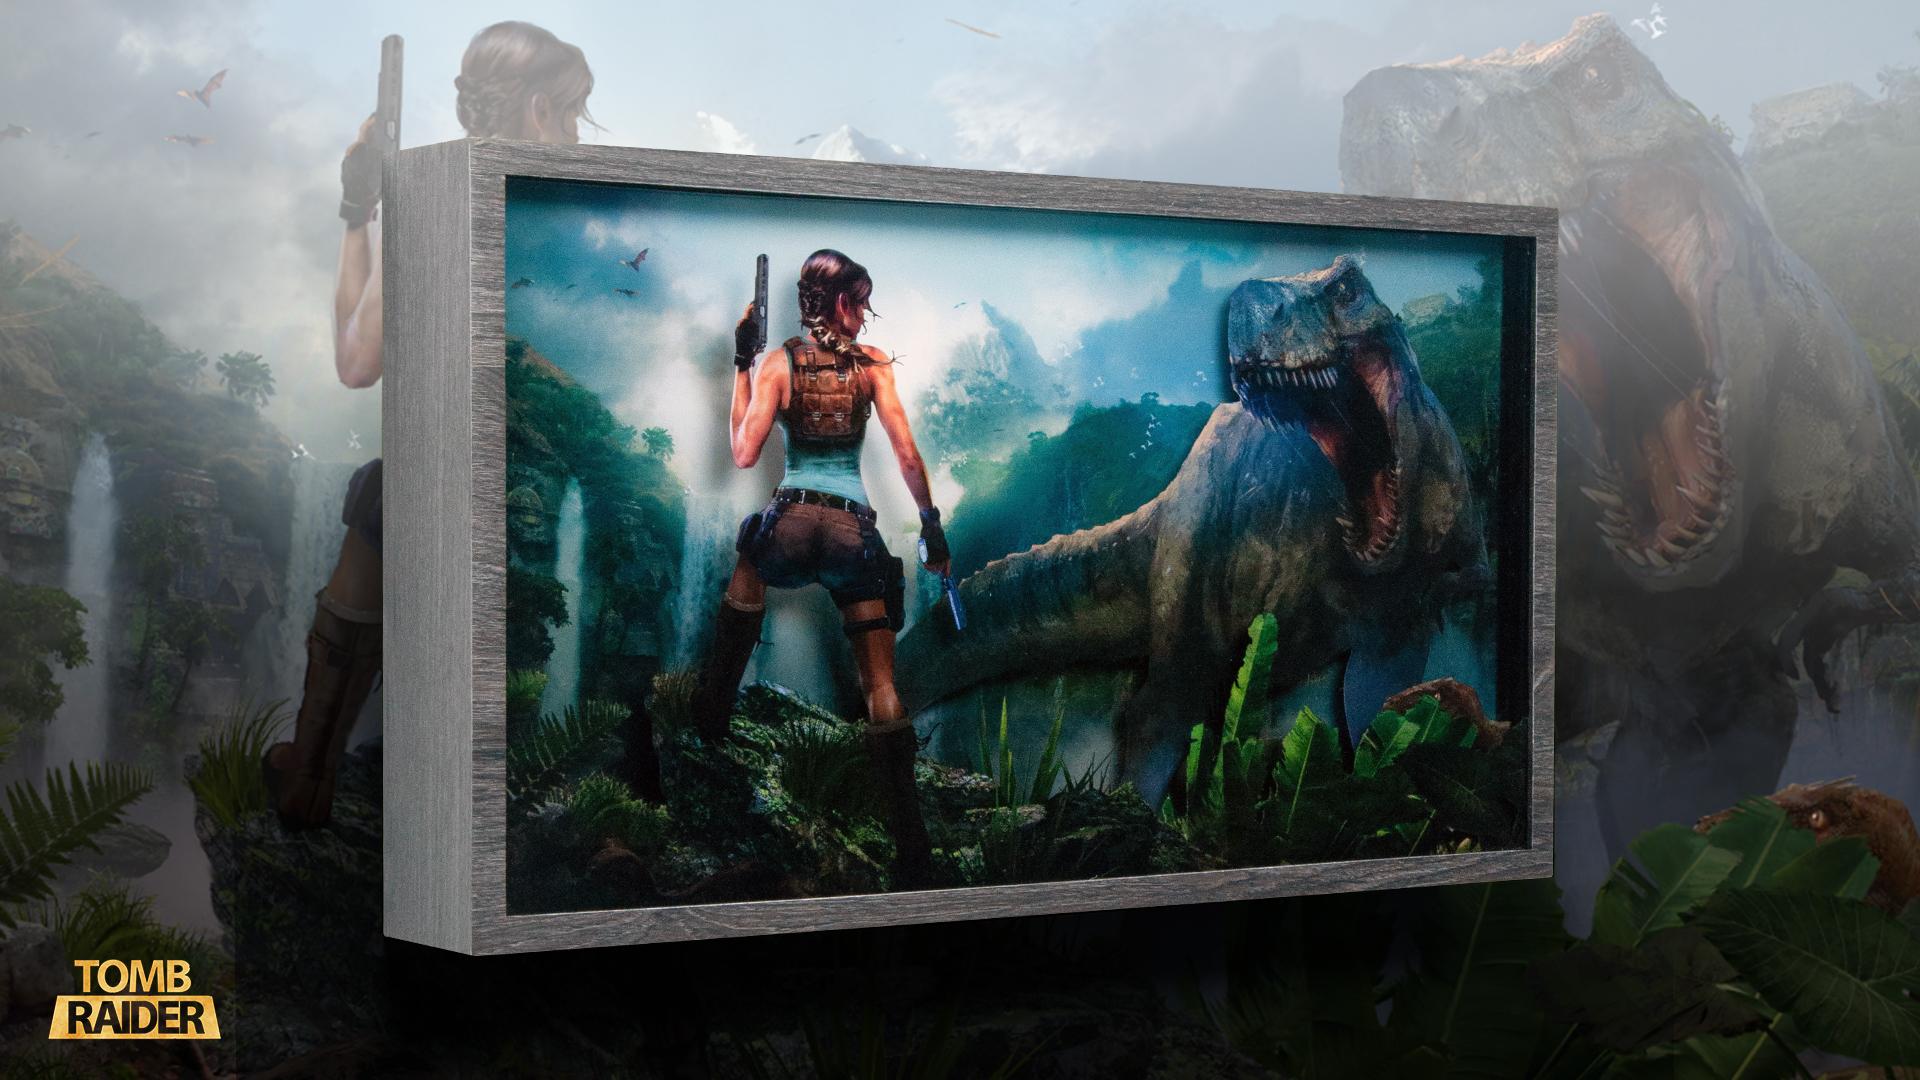 The Tomb Raider Lost Valley Shadowbox, a multi-layered light-up artwork feat. Lara Croft and a T-Rex.